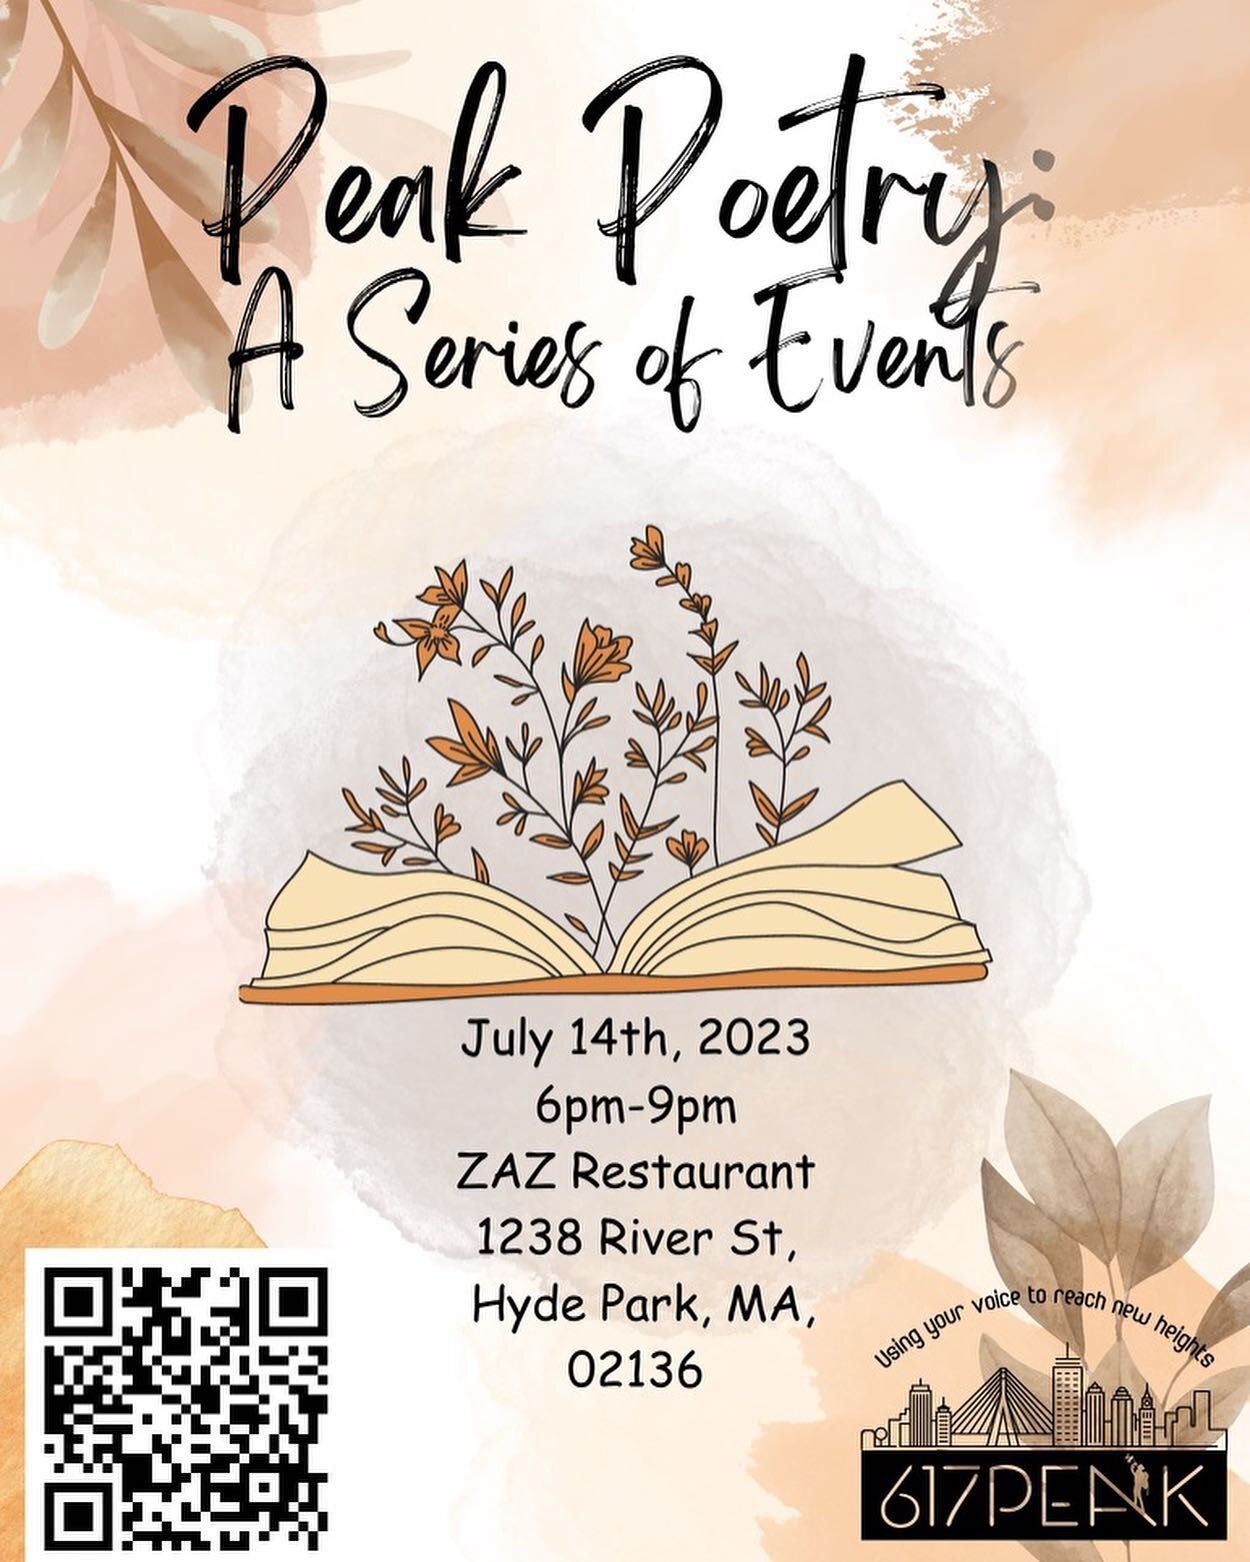 THIS FRIDAY, JULY 14th, 617Peak is hosting a poetry/creative writing workshop at Zaz in Hyde Park from 6pm-9pm!📚Doors will open at 5:45, tell a friend to tell a friend! 𝐋𝐈𝐍𝐊 𝐈𝐍 𝐎𝐔𝐑 𝐁𝐈𝐎 𝐓𝐎 𝐑𝐄𝐆𝐈𝐒𝐓𝐄𝐑! AGES 14-19! 

July 14th, 2023